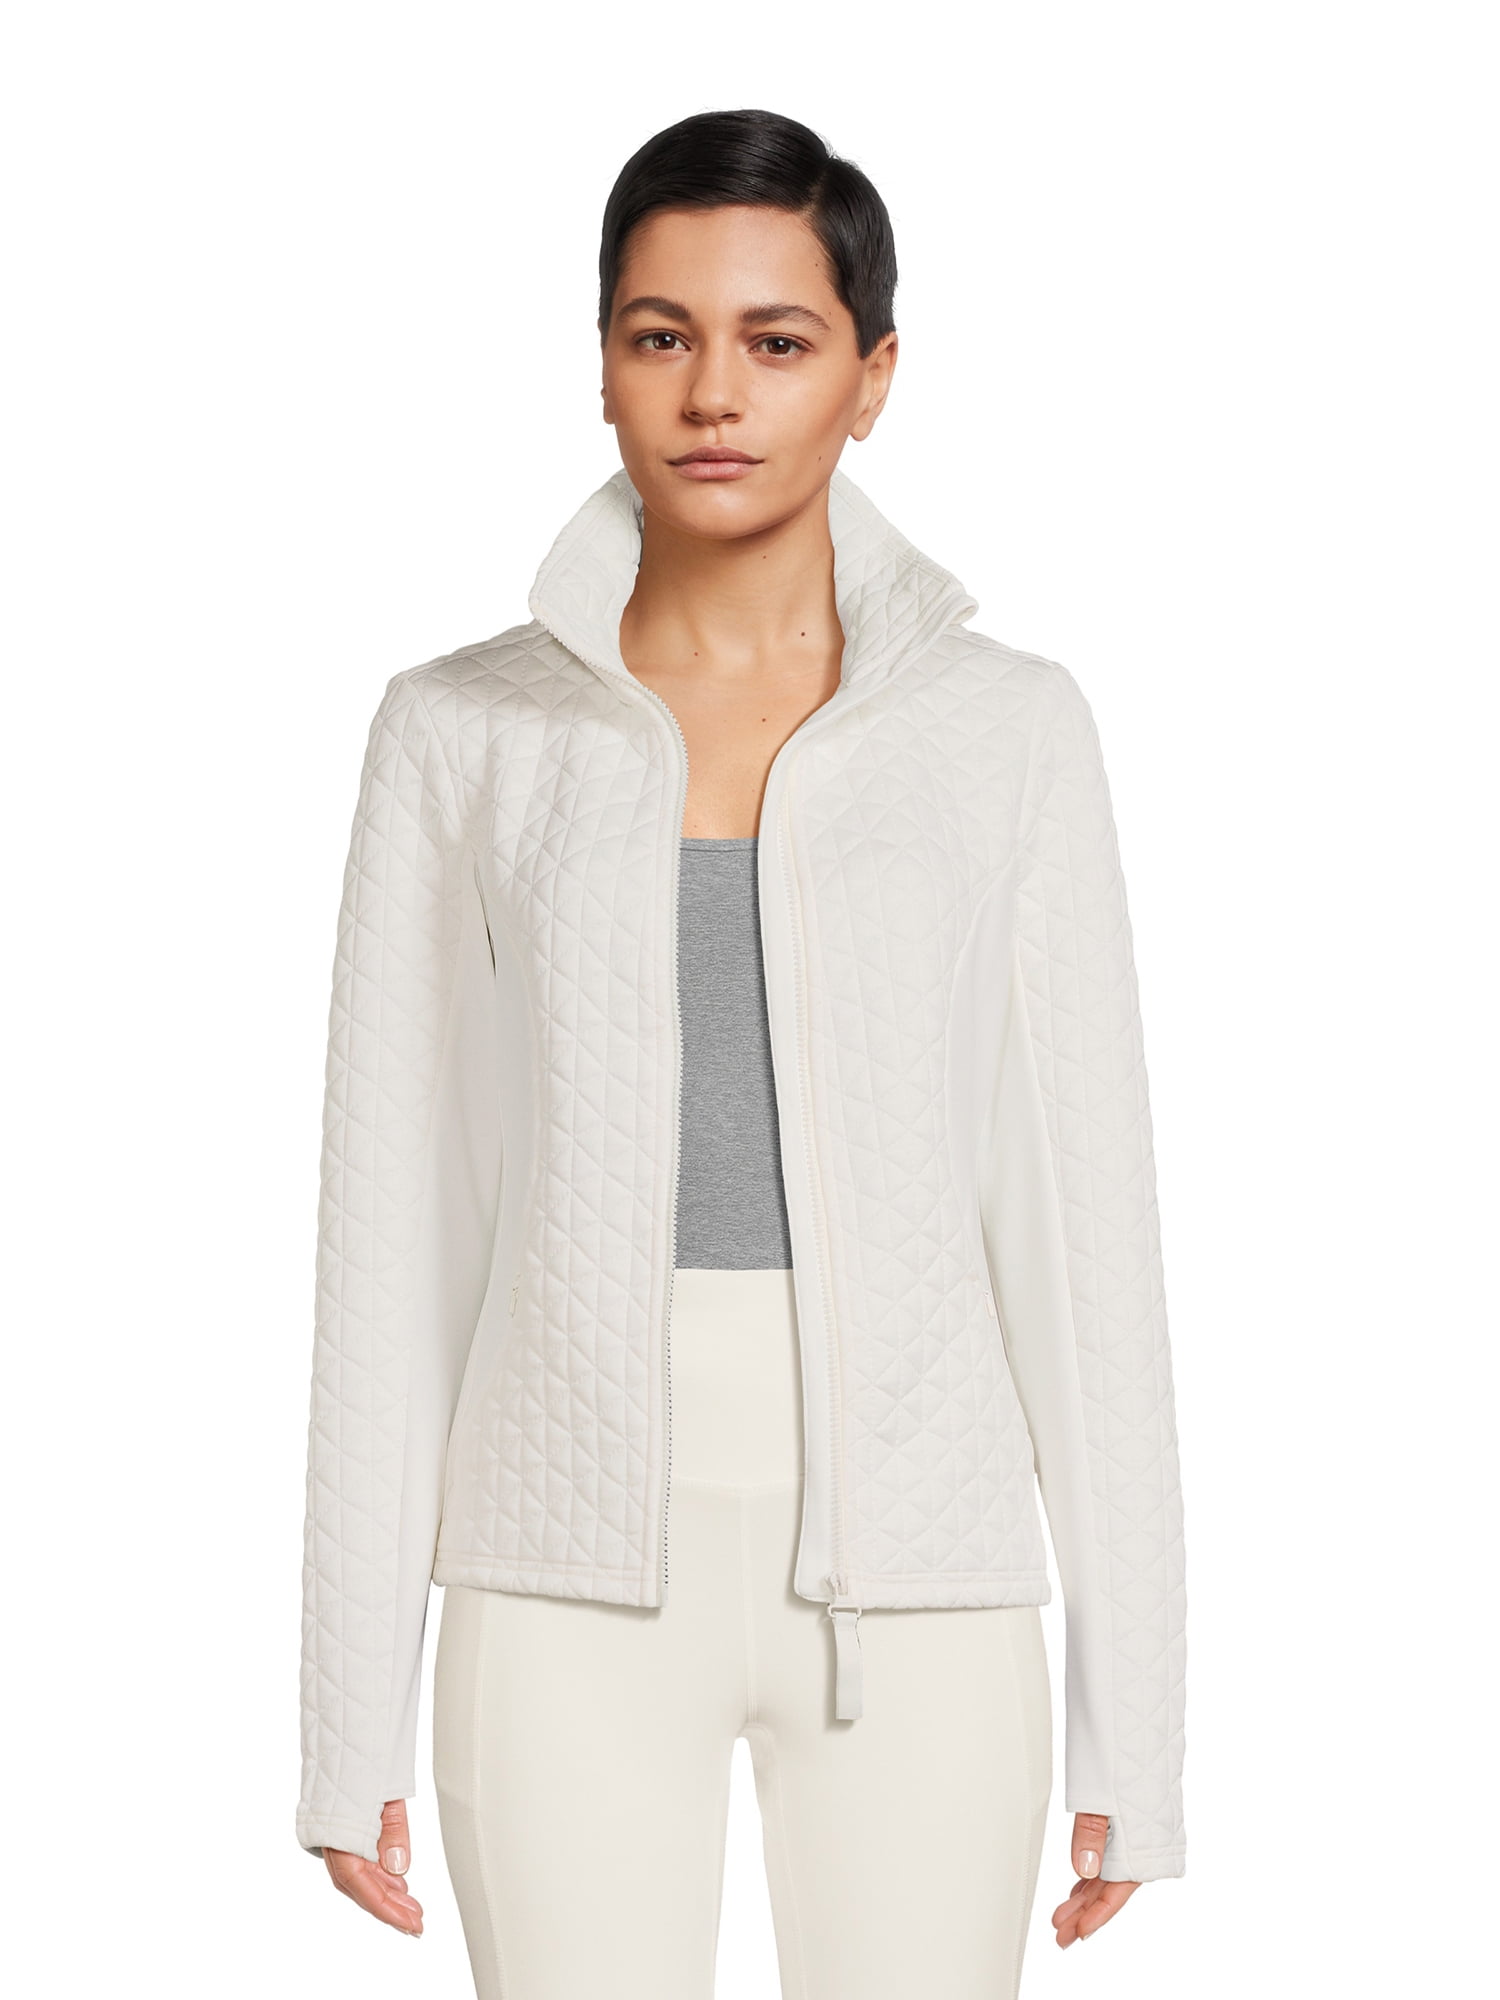 Avia Women's Quilted Jacket With Thumbholes - Walmart.com